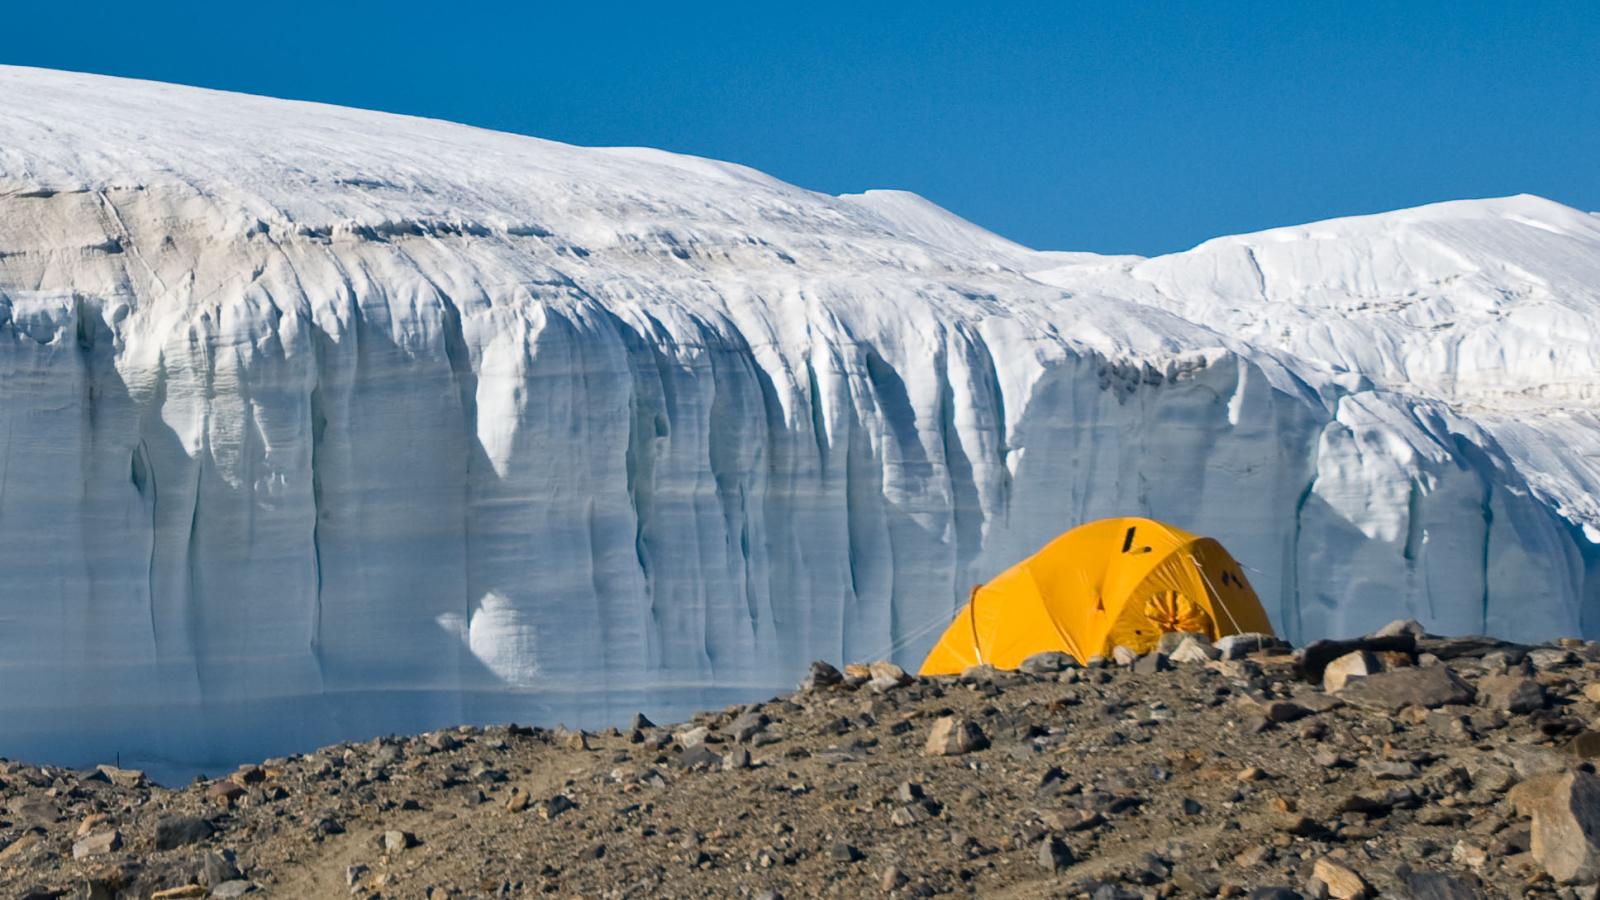 Remote Sensing Lab. A yellow tent is placed beside a large glacier